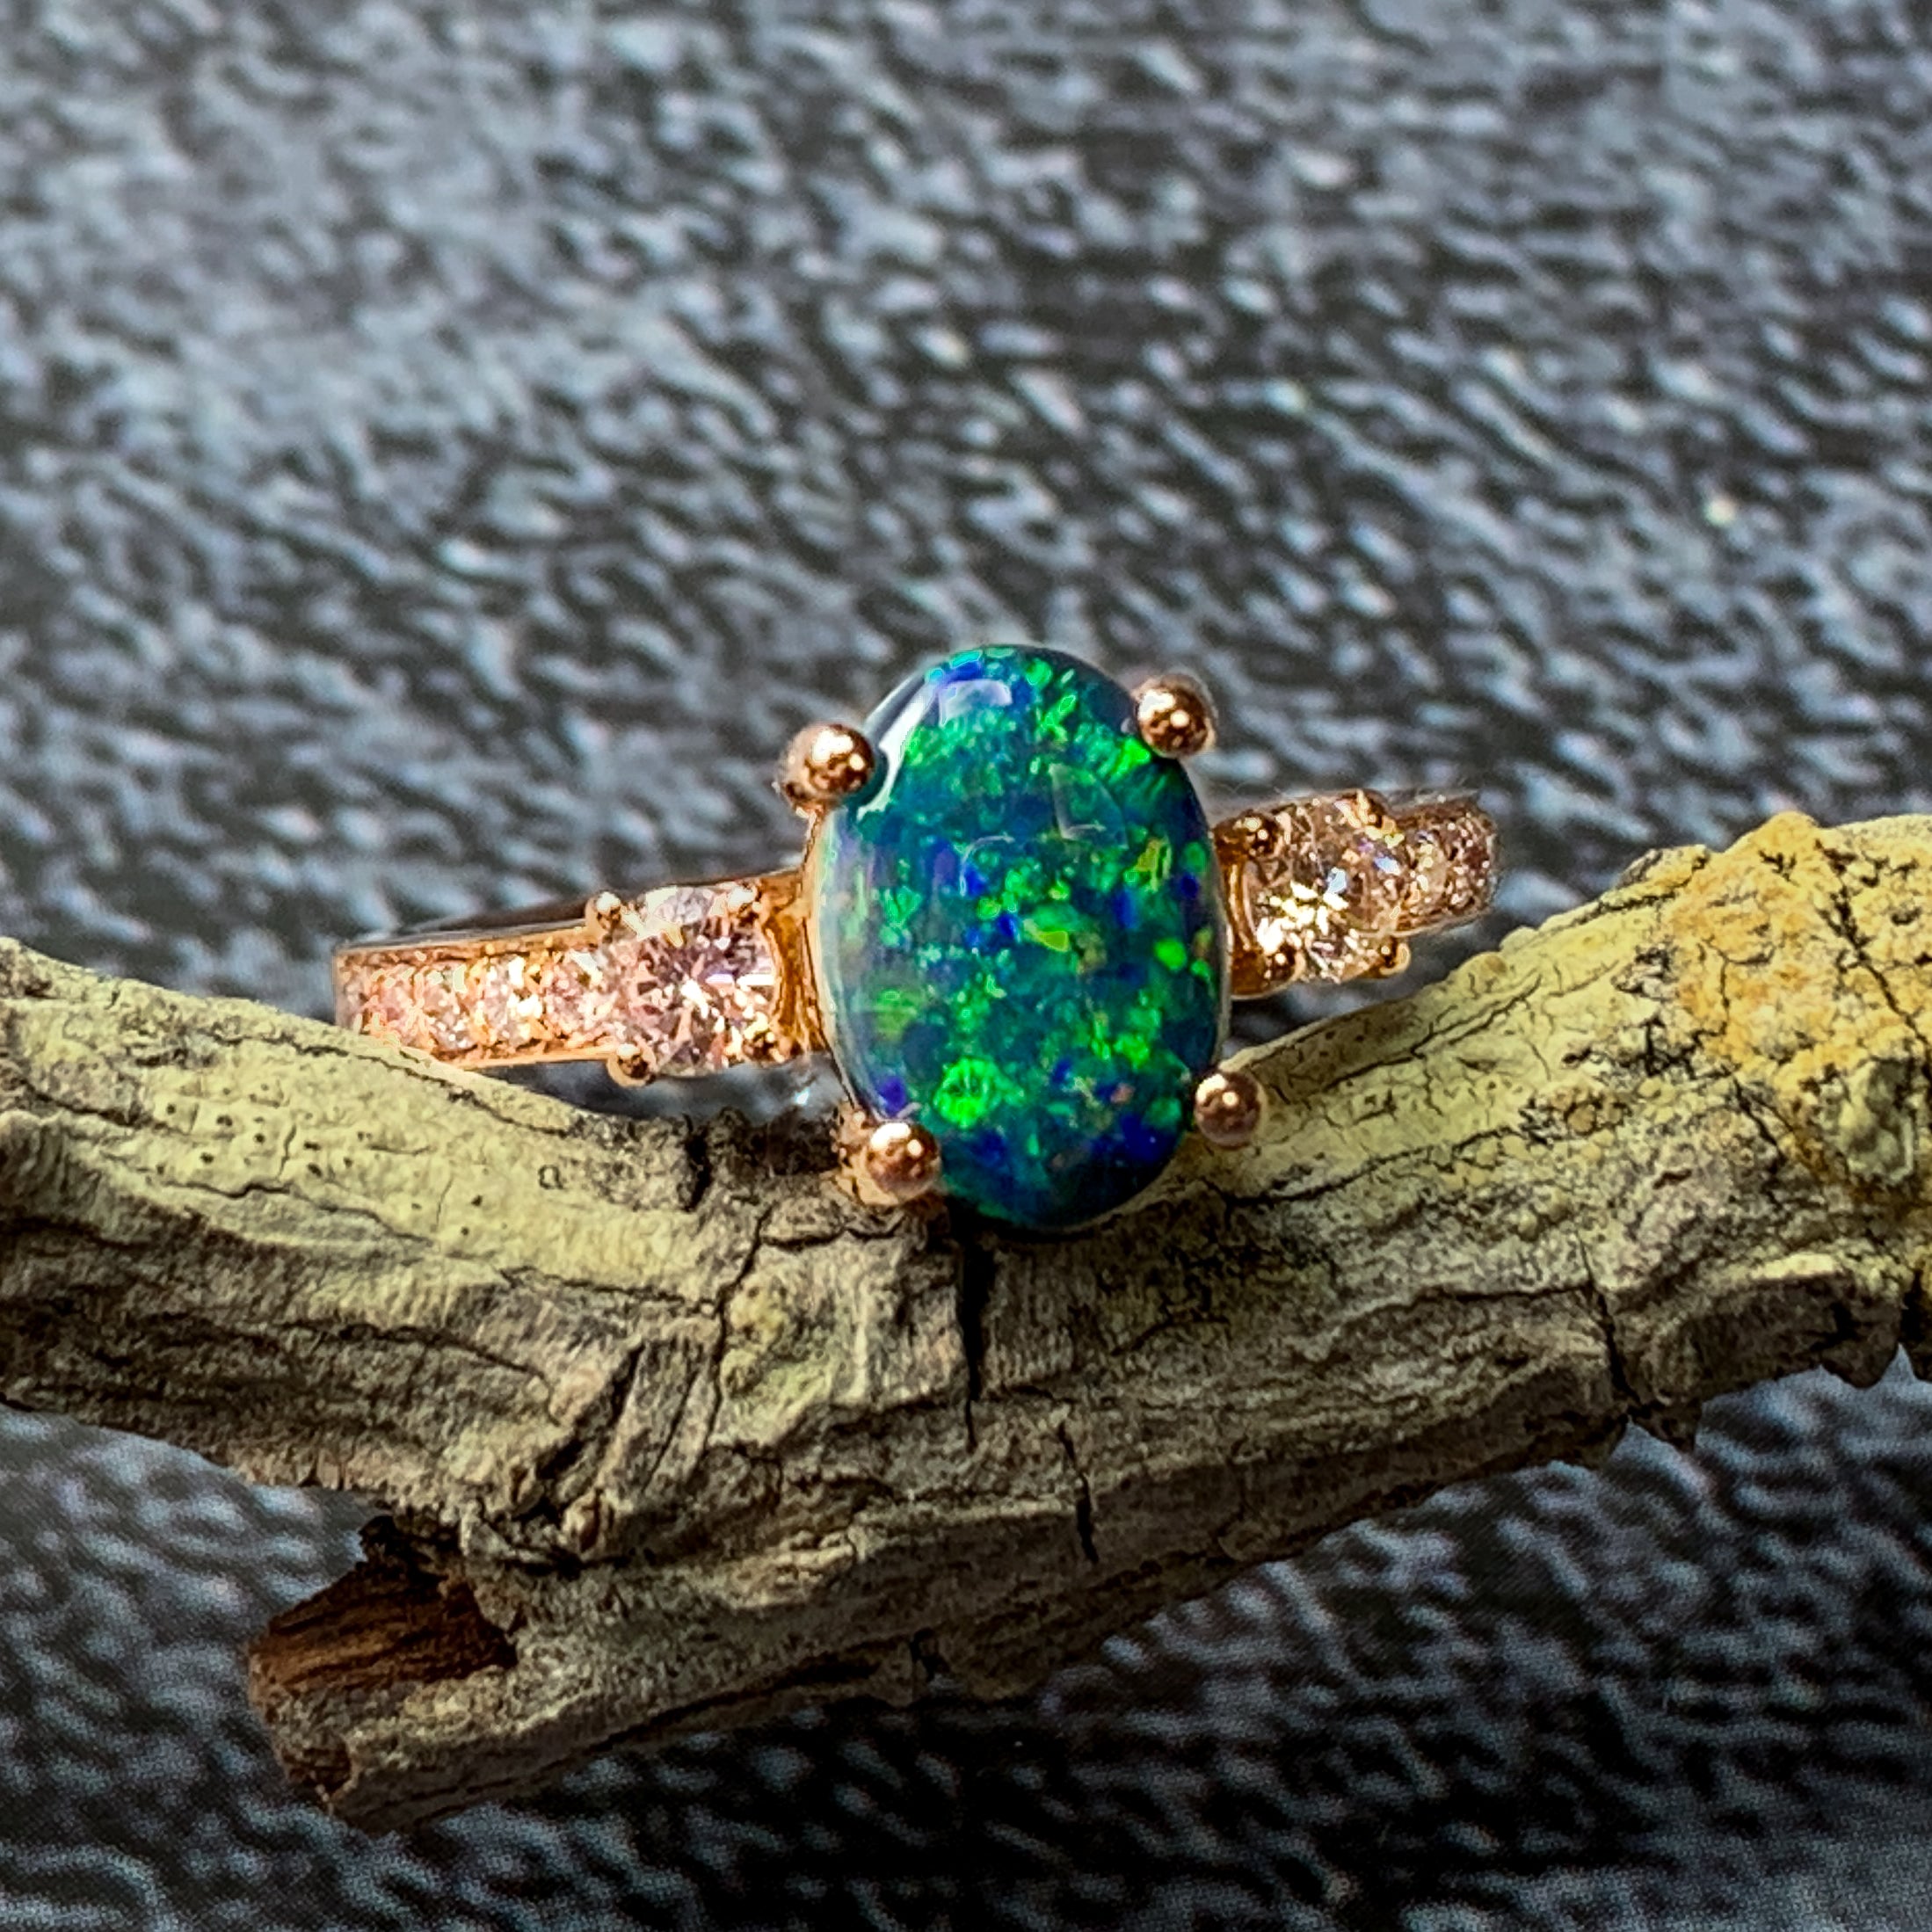 18kt Rose Gold ring set with one 1.63ct Black Opal and 0.38ct Pink Diamonds - Masterpiece Jewellery Opal & Gems Sydney Australia | Online Shop